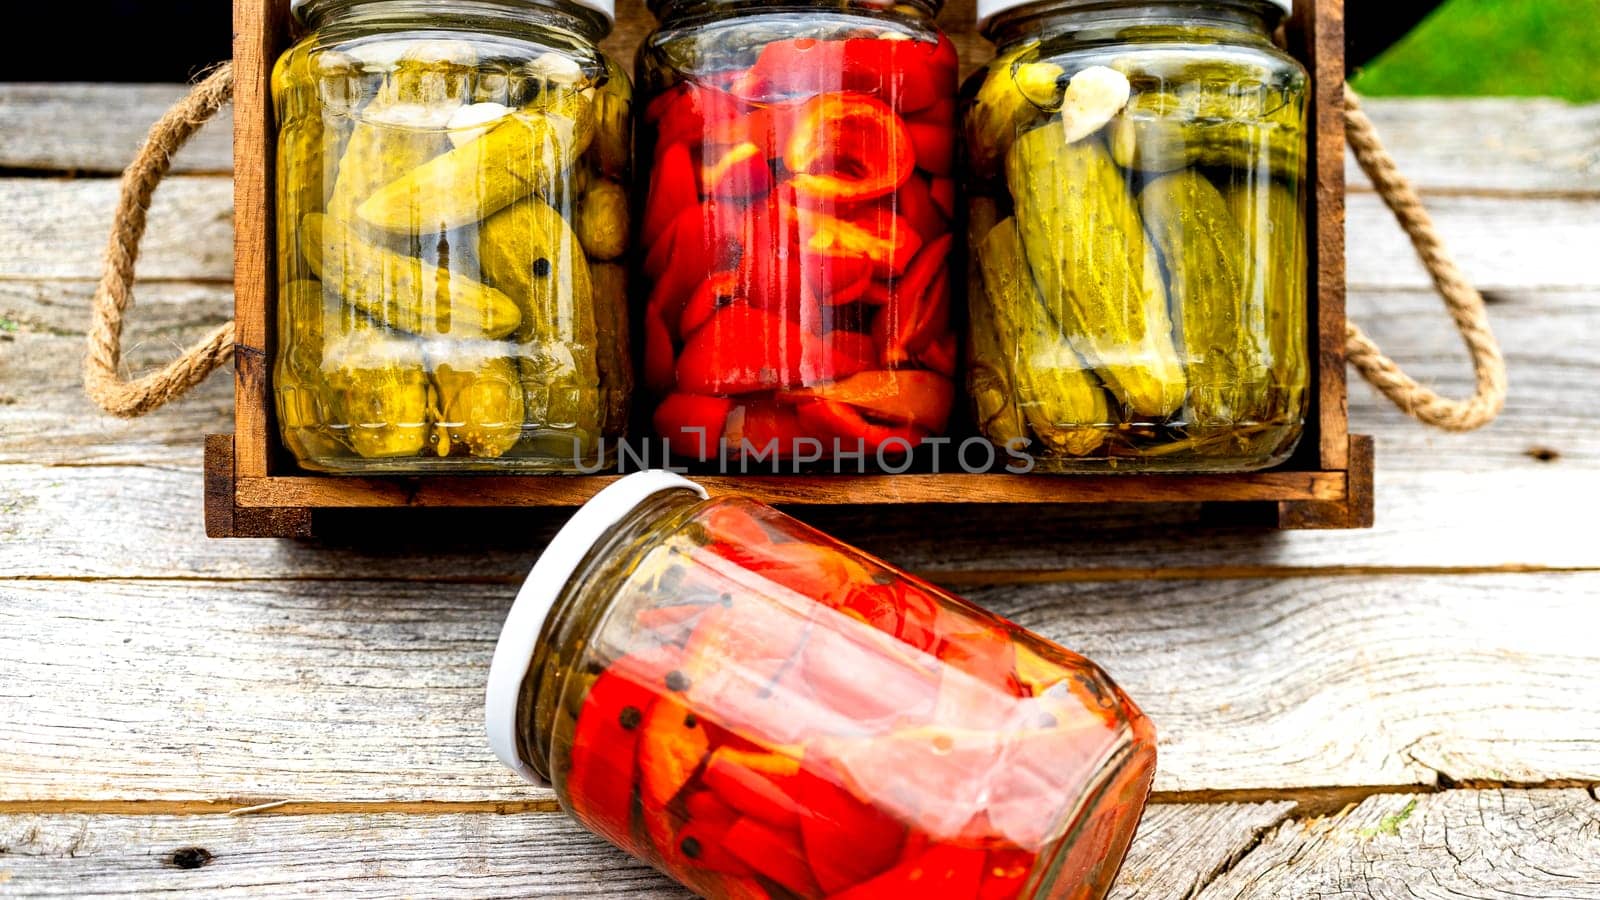 Glass jars with pickled red bell peppers and pickled cucumbers (pickles) isolated in wooden crate. Jars with variety of pickled vegetables. Preserved food concept in a rustic composition. by vladispas